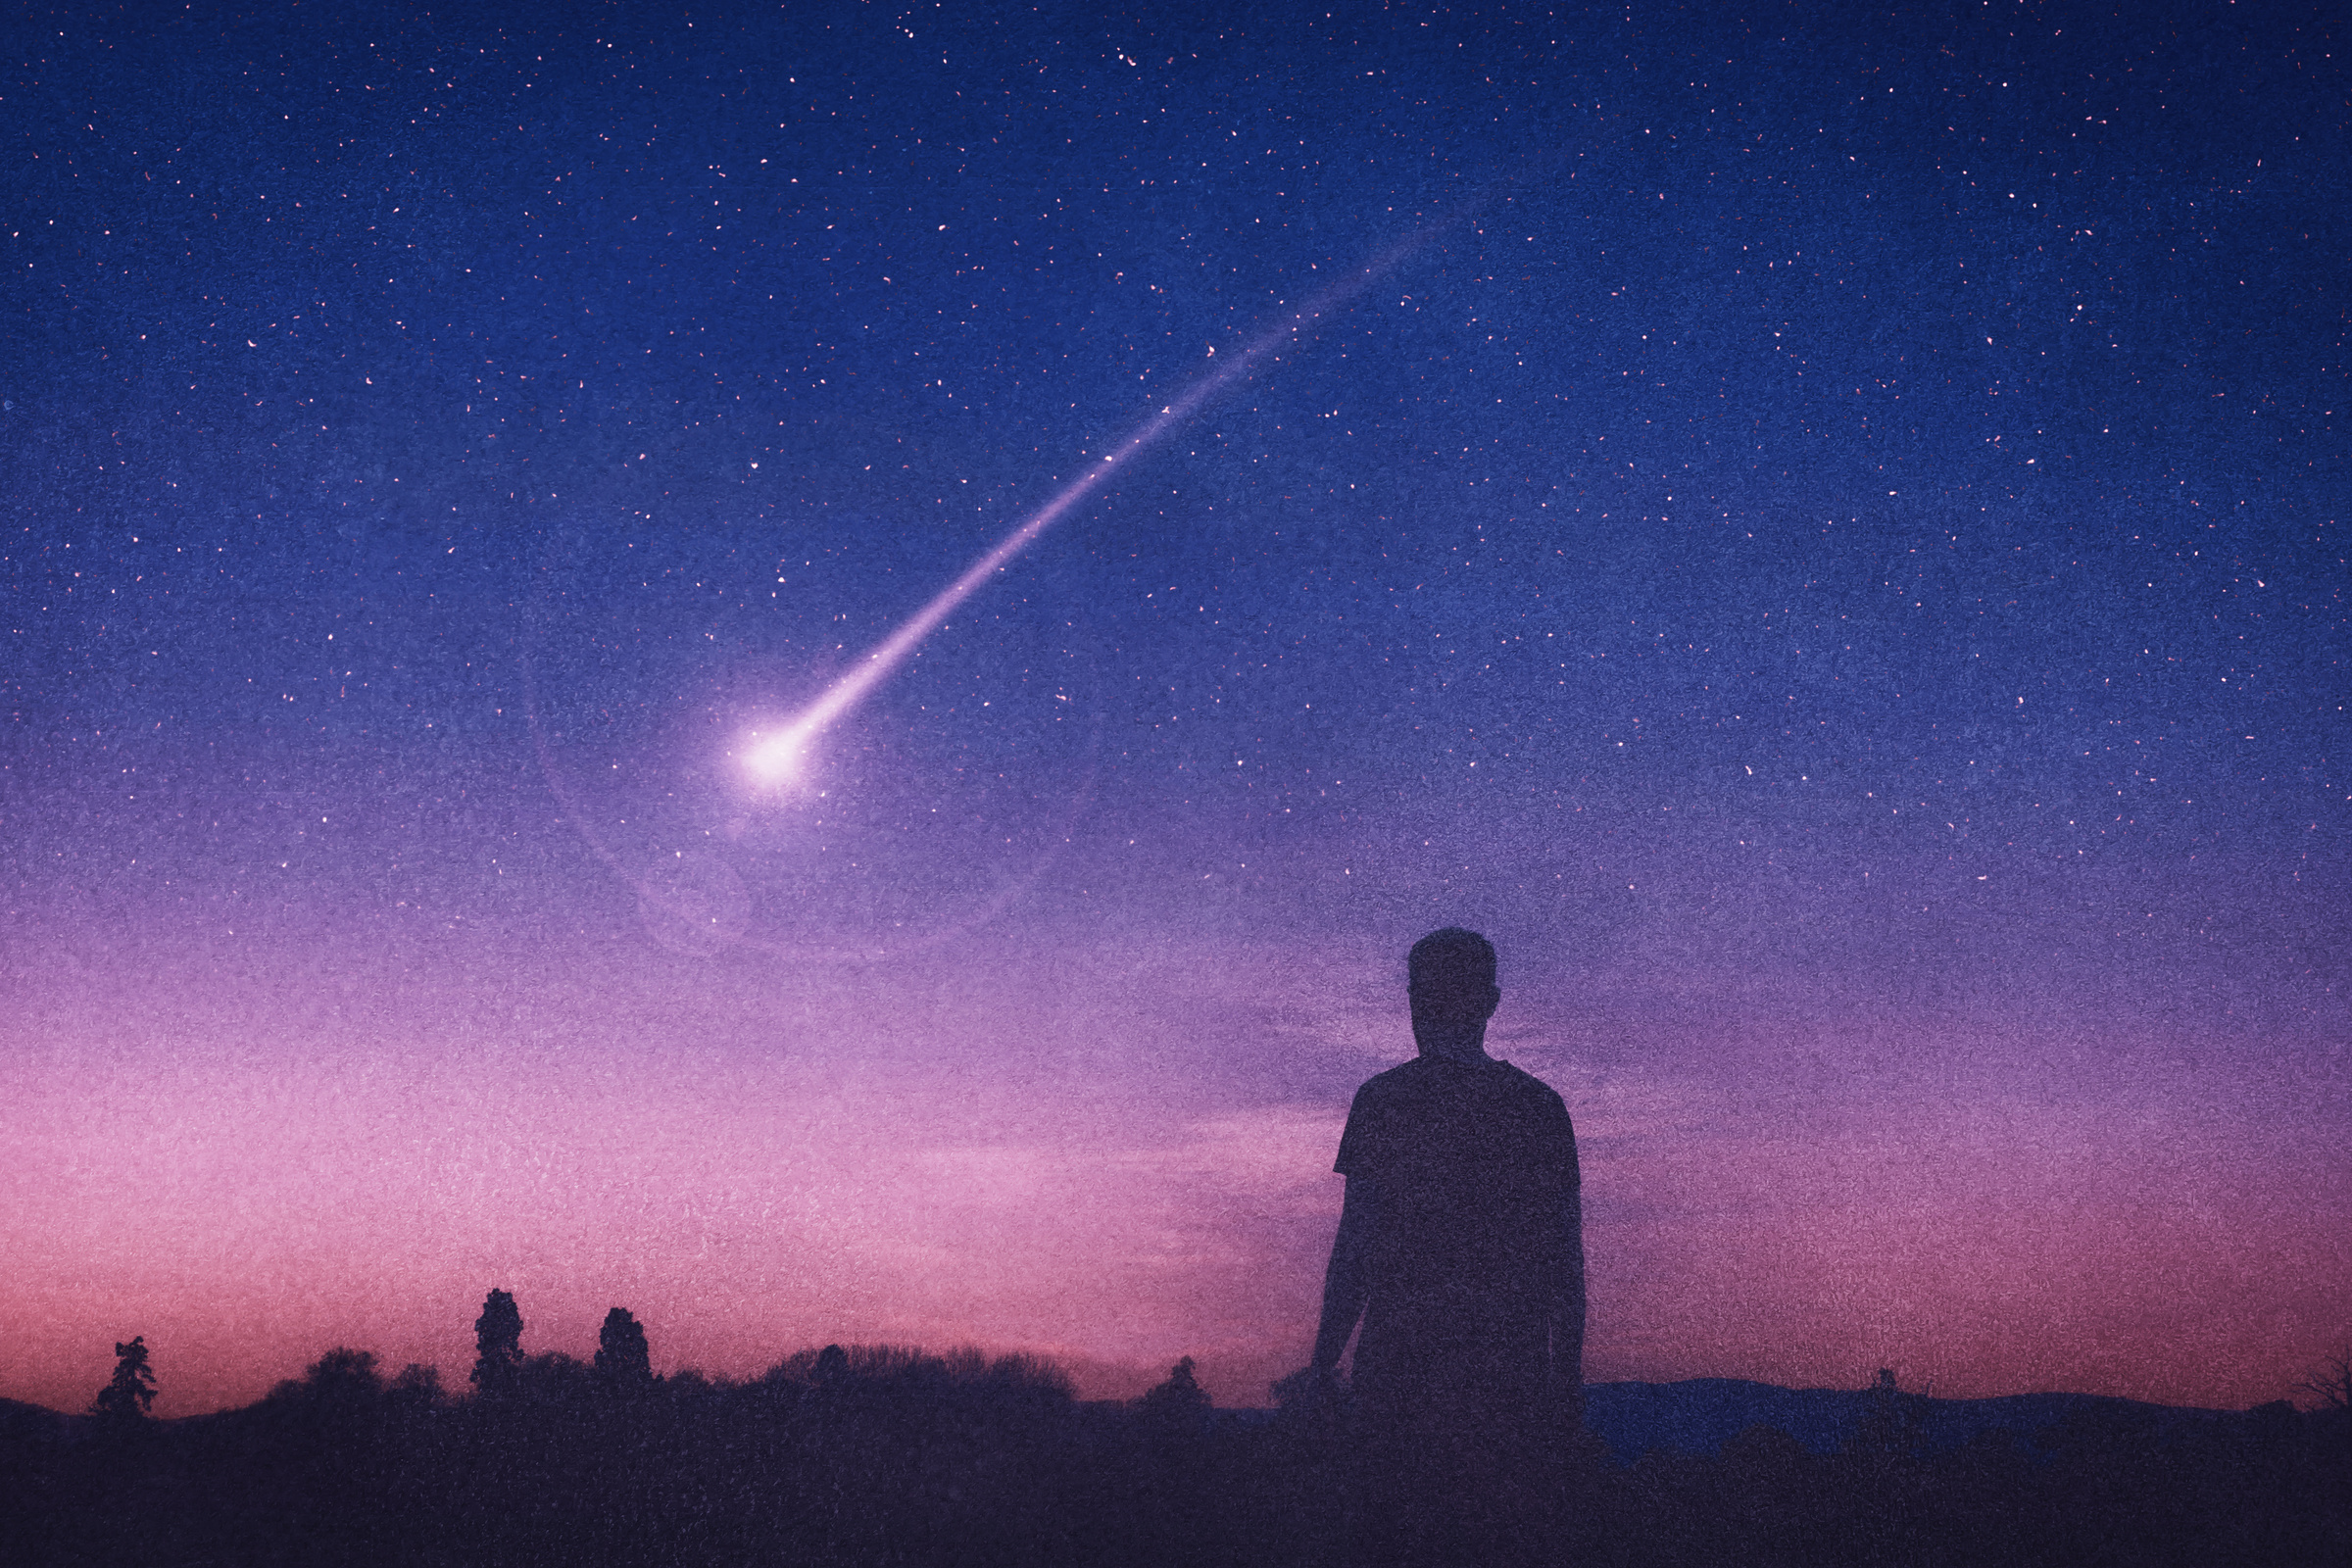 Silhouette of a Man Looking at a Shooting Star